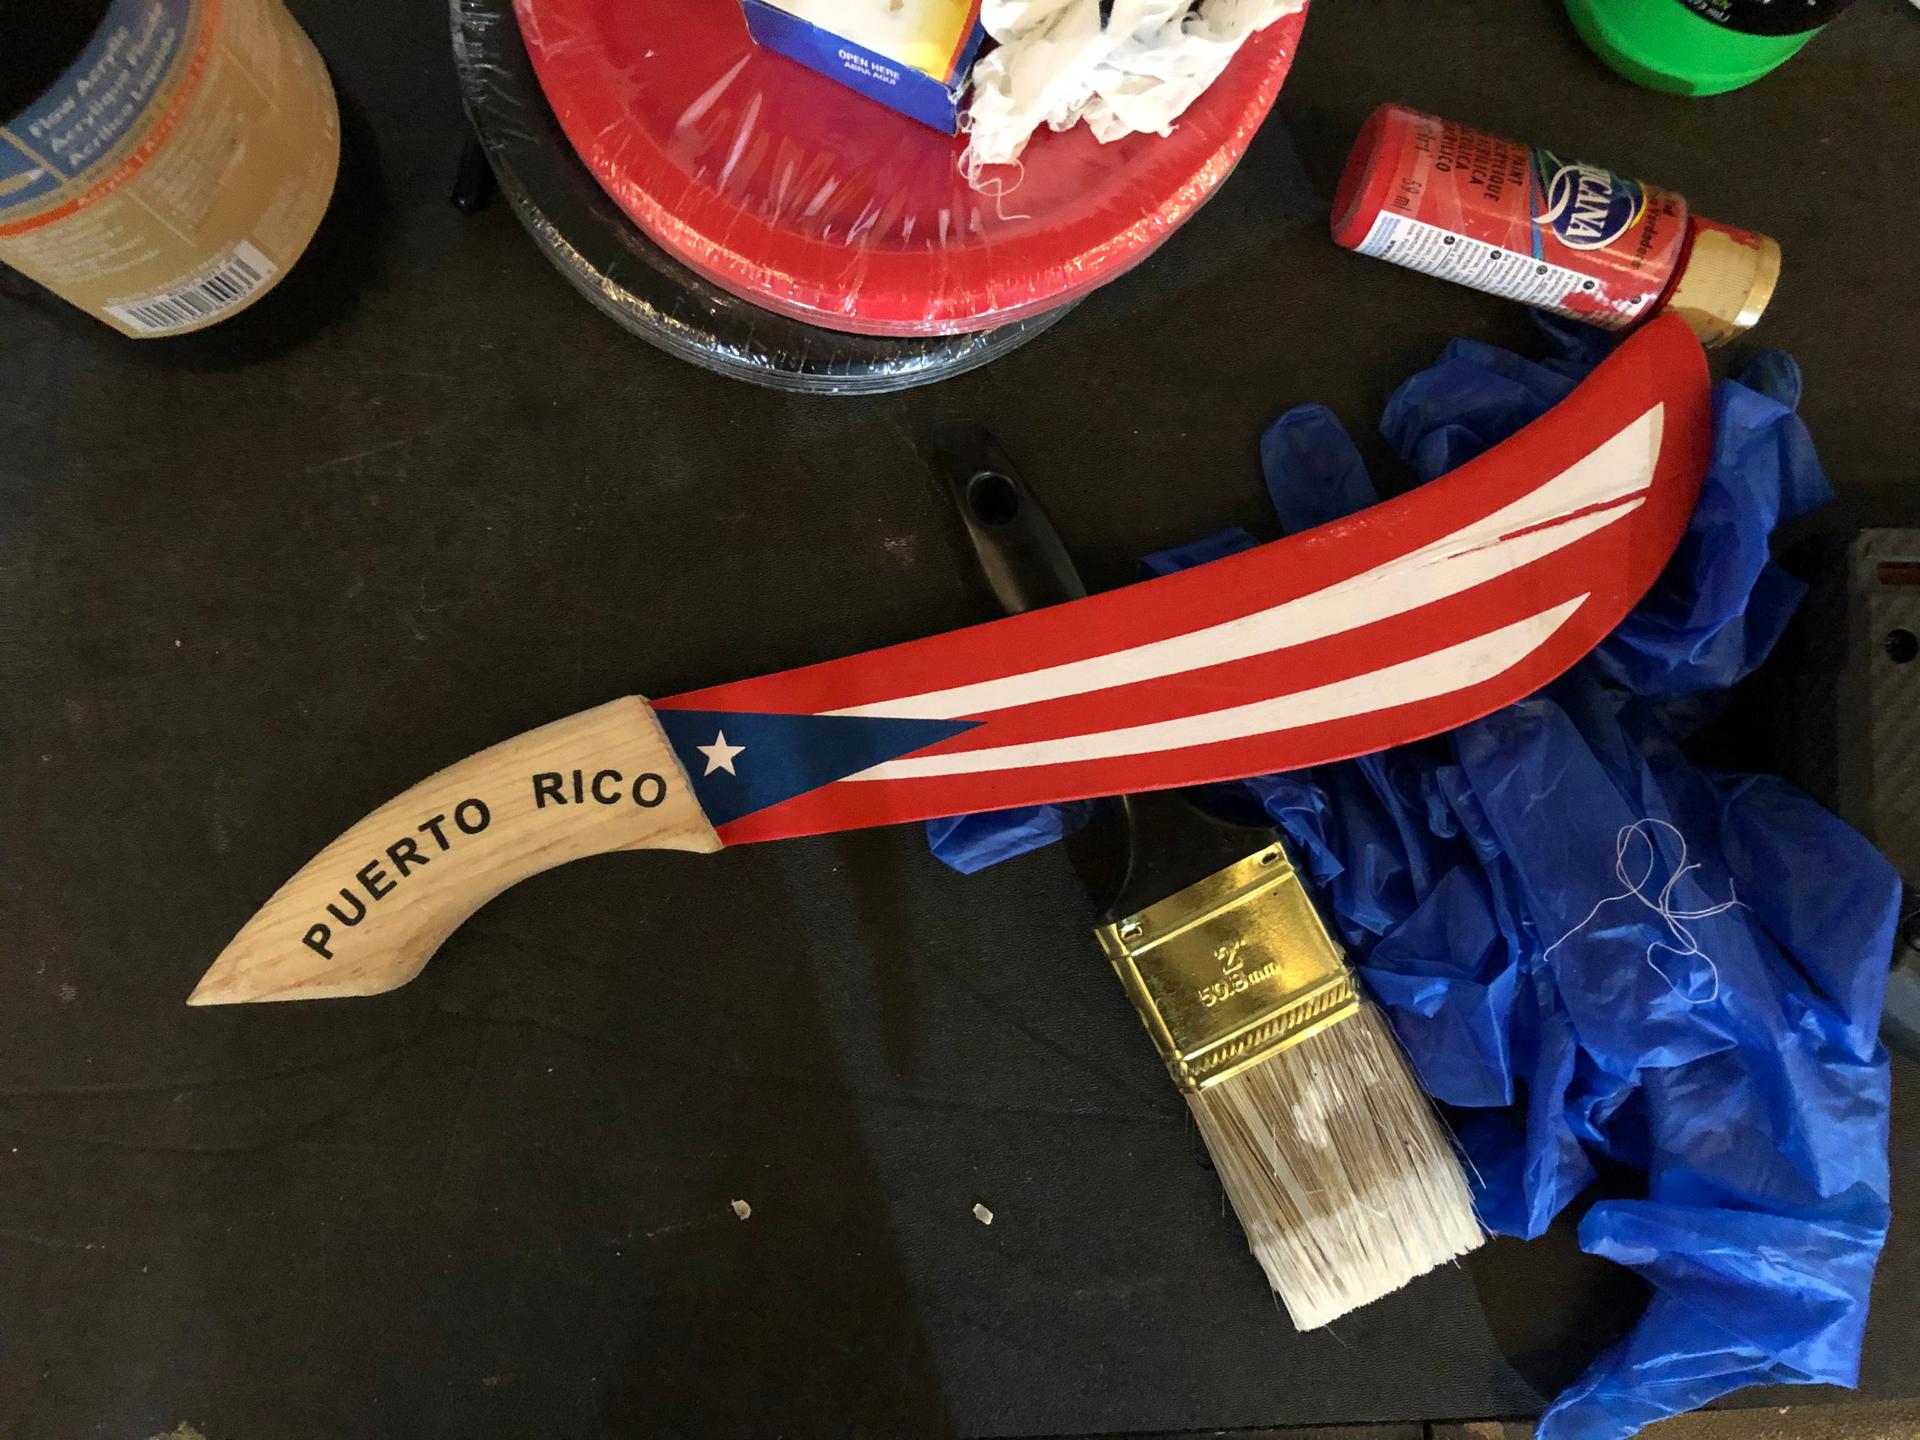 A prop wooden machete painted red, white and blue to match the Puerto Rican flag.